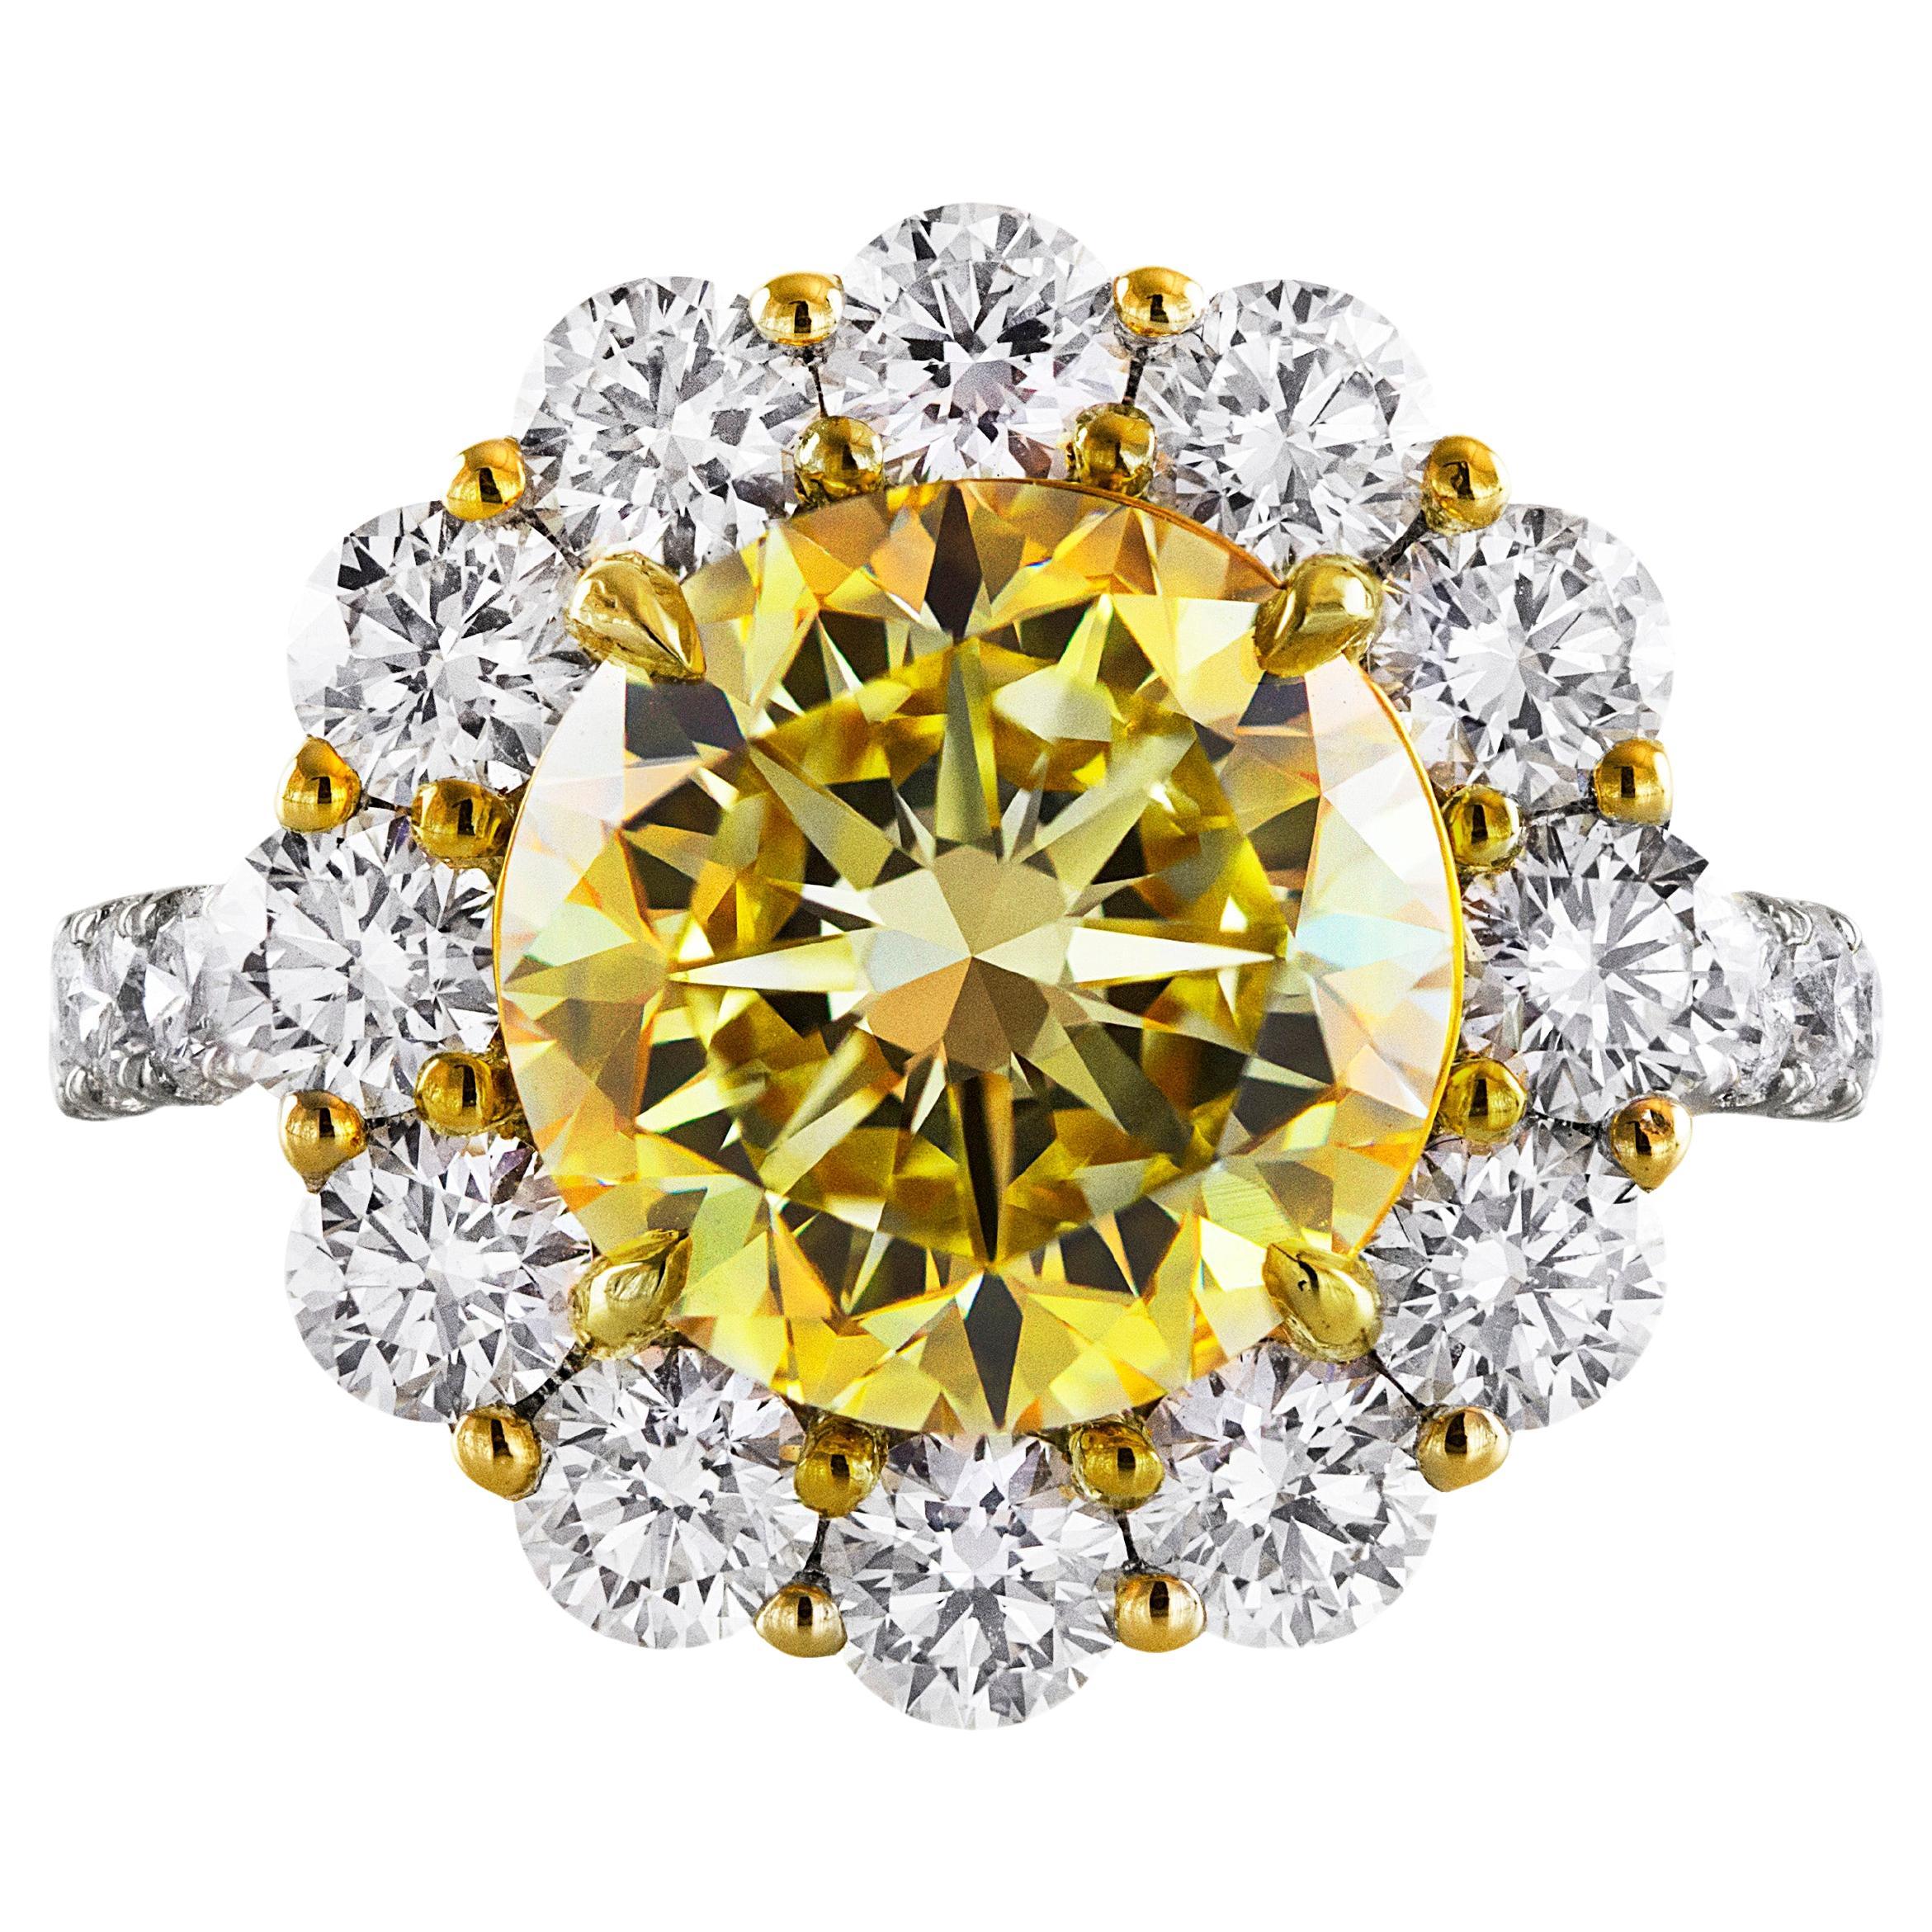 GIA Certified 4.47 Carat Round Cut Fancy Intense Yellow Diamond Engagement Ring For Sale